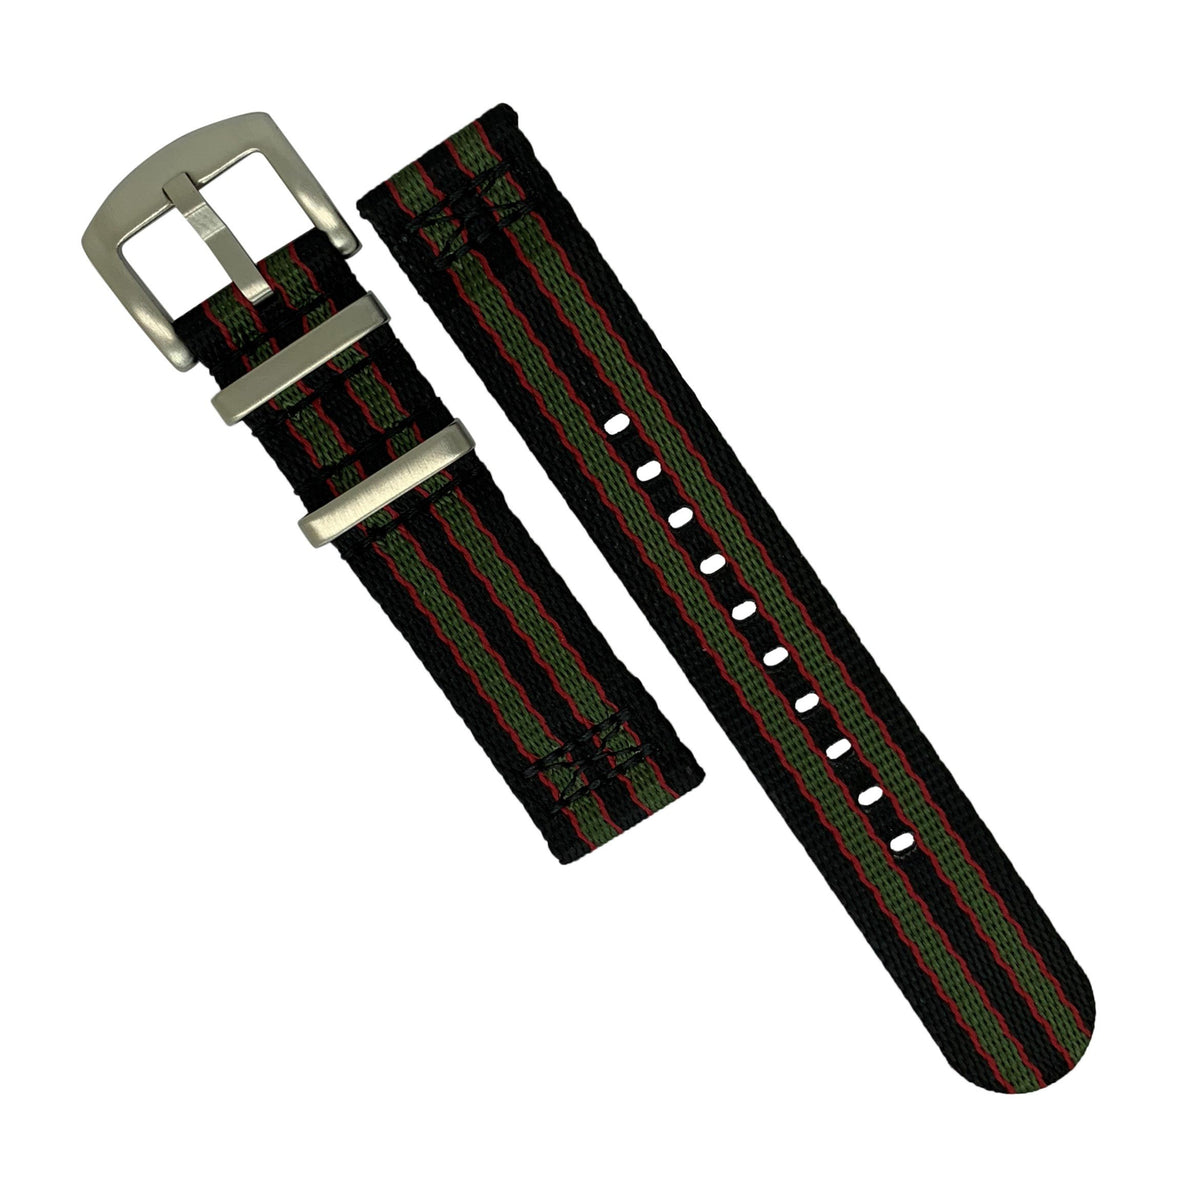 Two Piece Seat Belt Nato Strap in Black Green Red (James Bond) with Brushed Silver Buckle (20mm) - Nomad Watch Works Malaysia